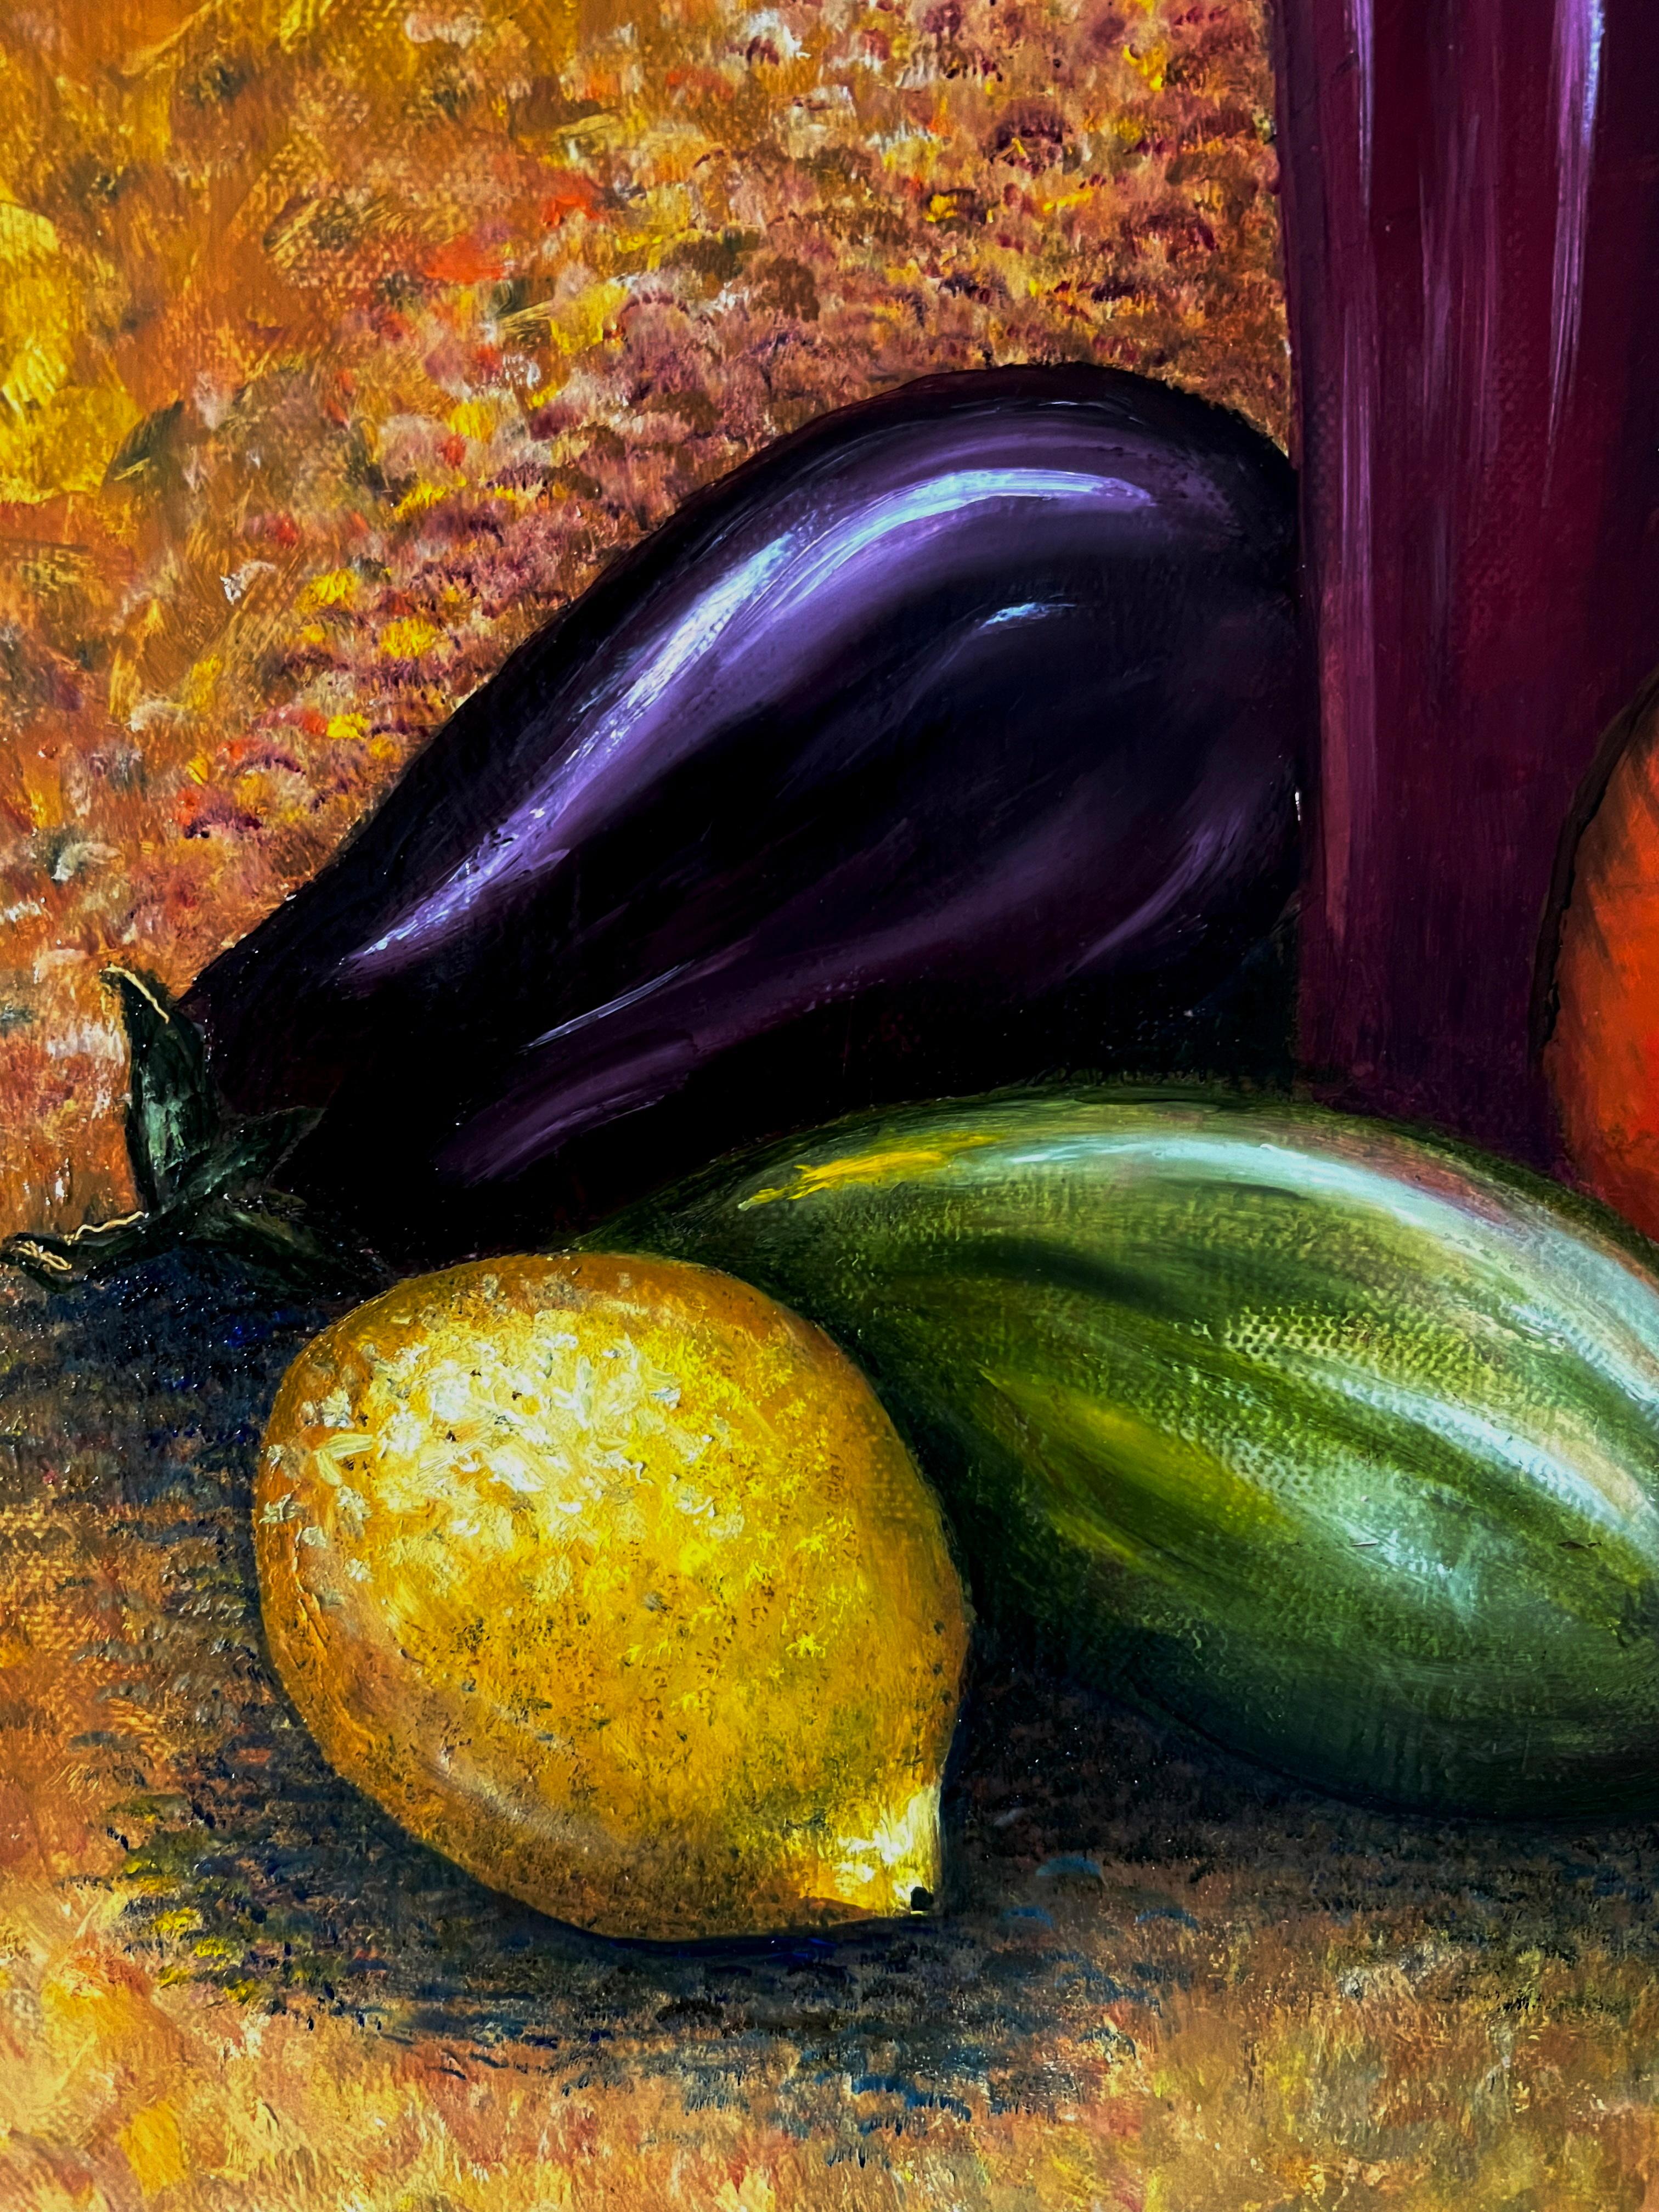  It may be healthy. Oil painting. Impressionism style. Still life 50/40 cm. For Sale 8